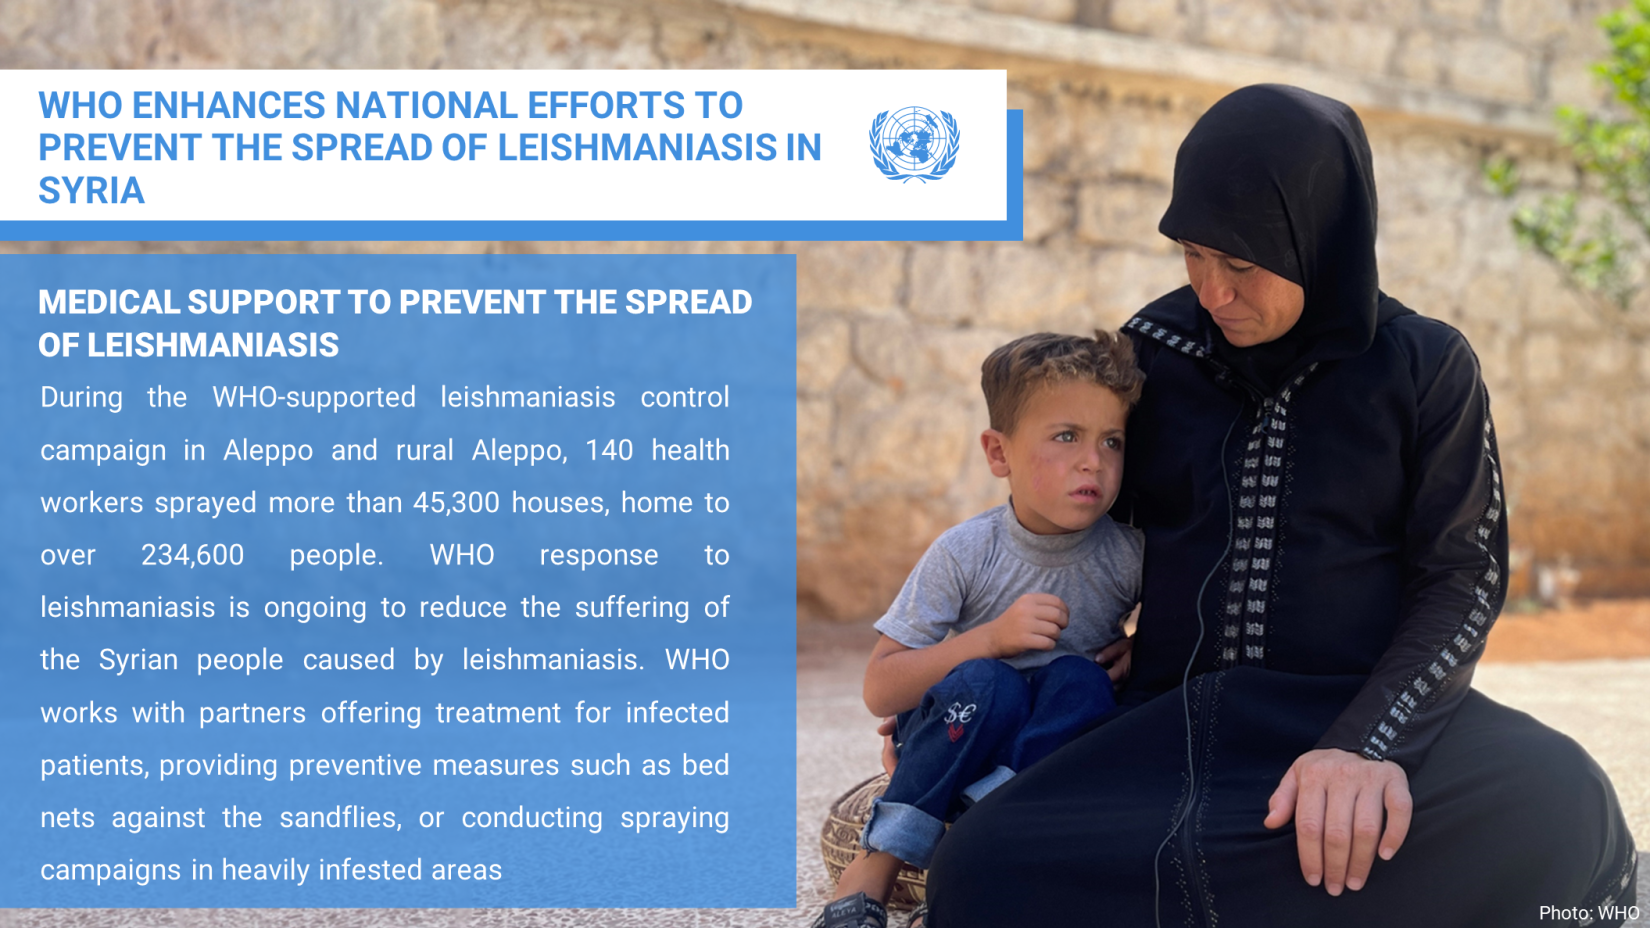 WHO ENHANCES NATIONAL EFFORTS TO PREVENT THE SPREAD OF LEISHMANIASIS IN SYRIA